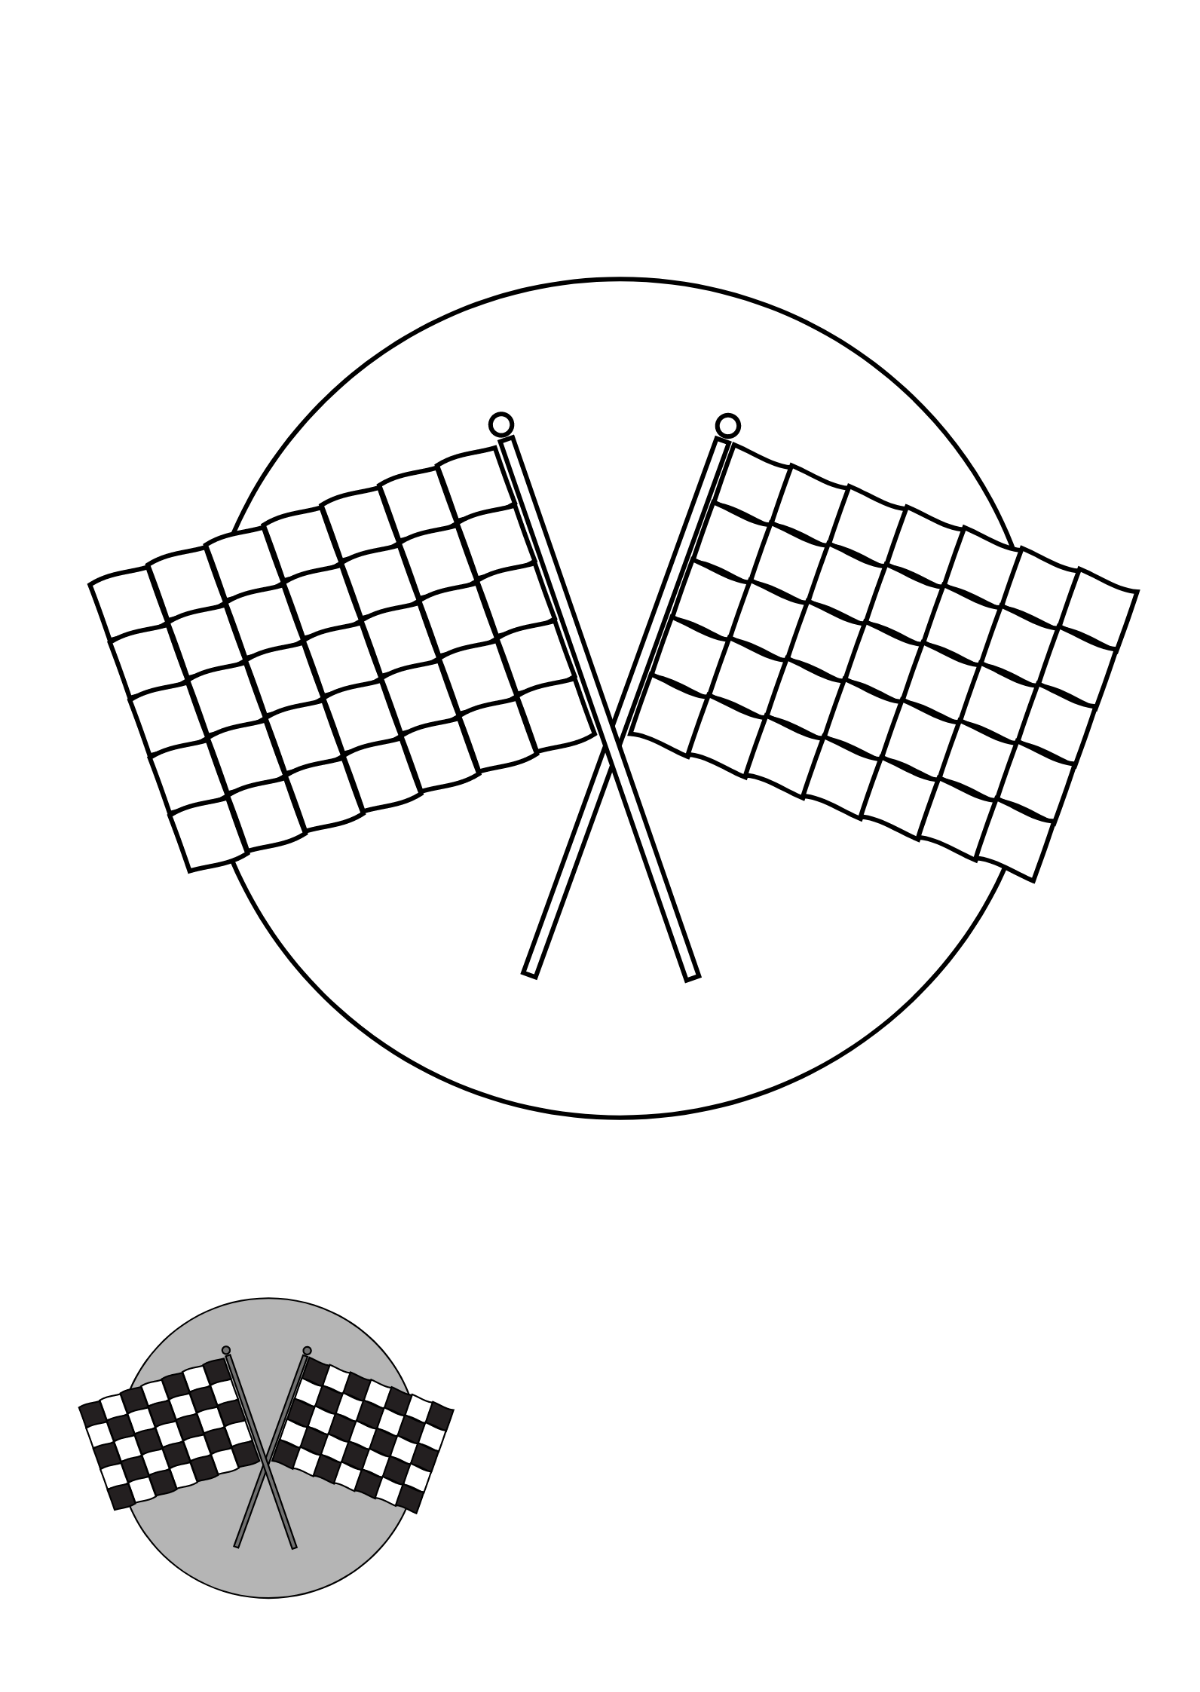 Crossed Checkered Flag coloring page Template